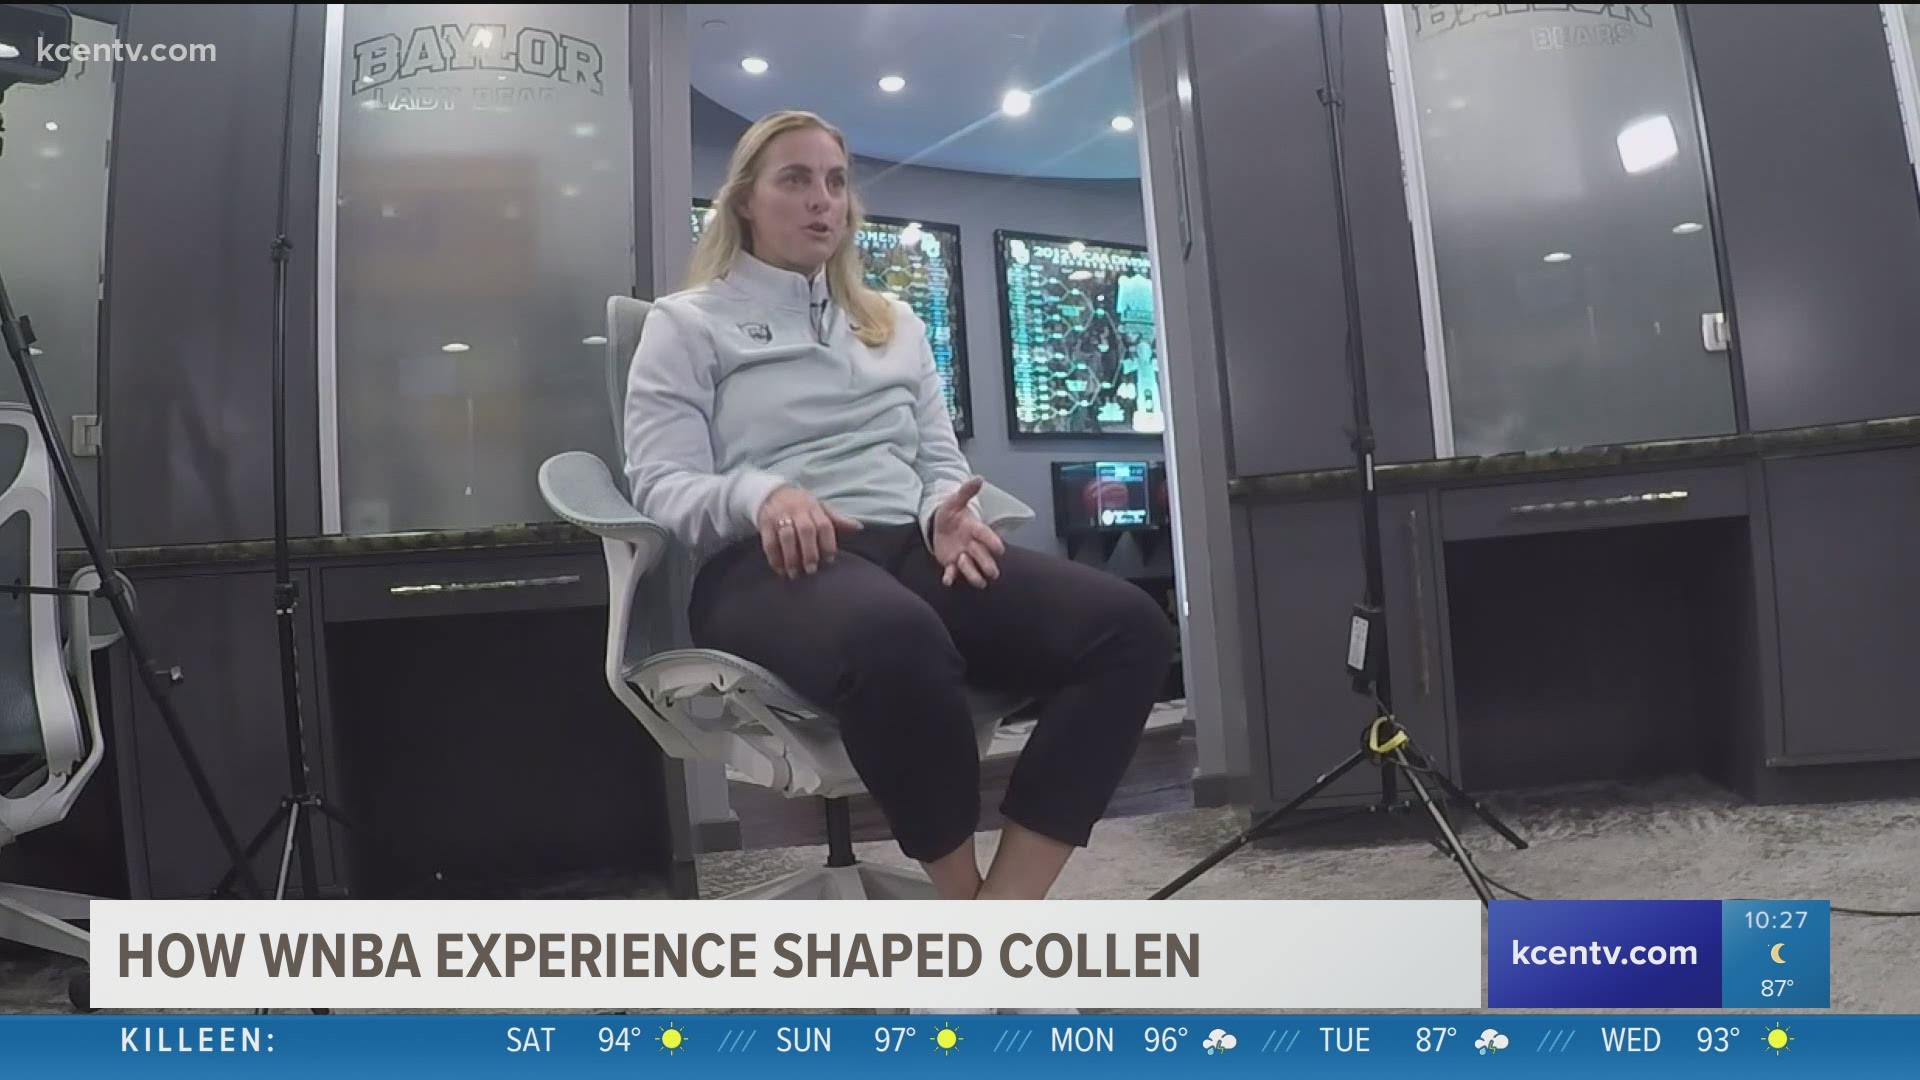 After five years in the WNBA, Nicki Collen is returning to the college game. How does that time in the pro's help her approach at Baylor?